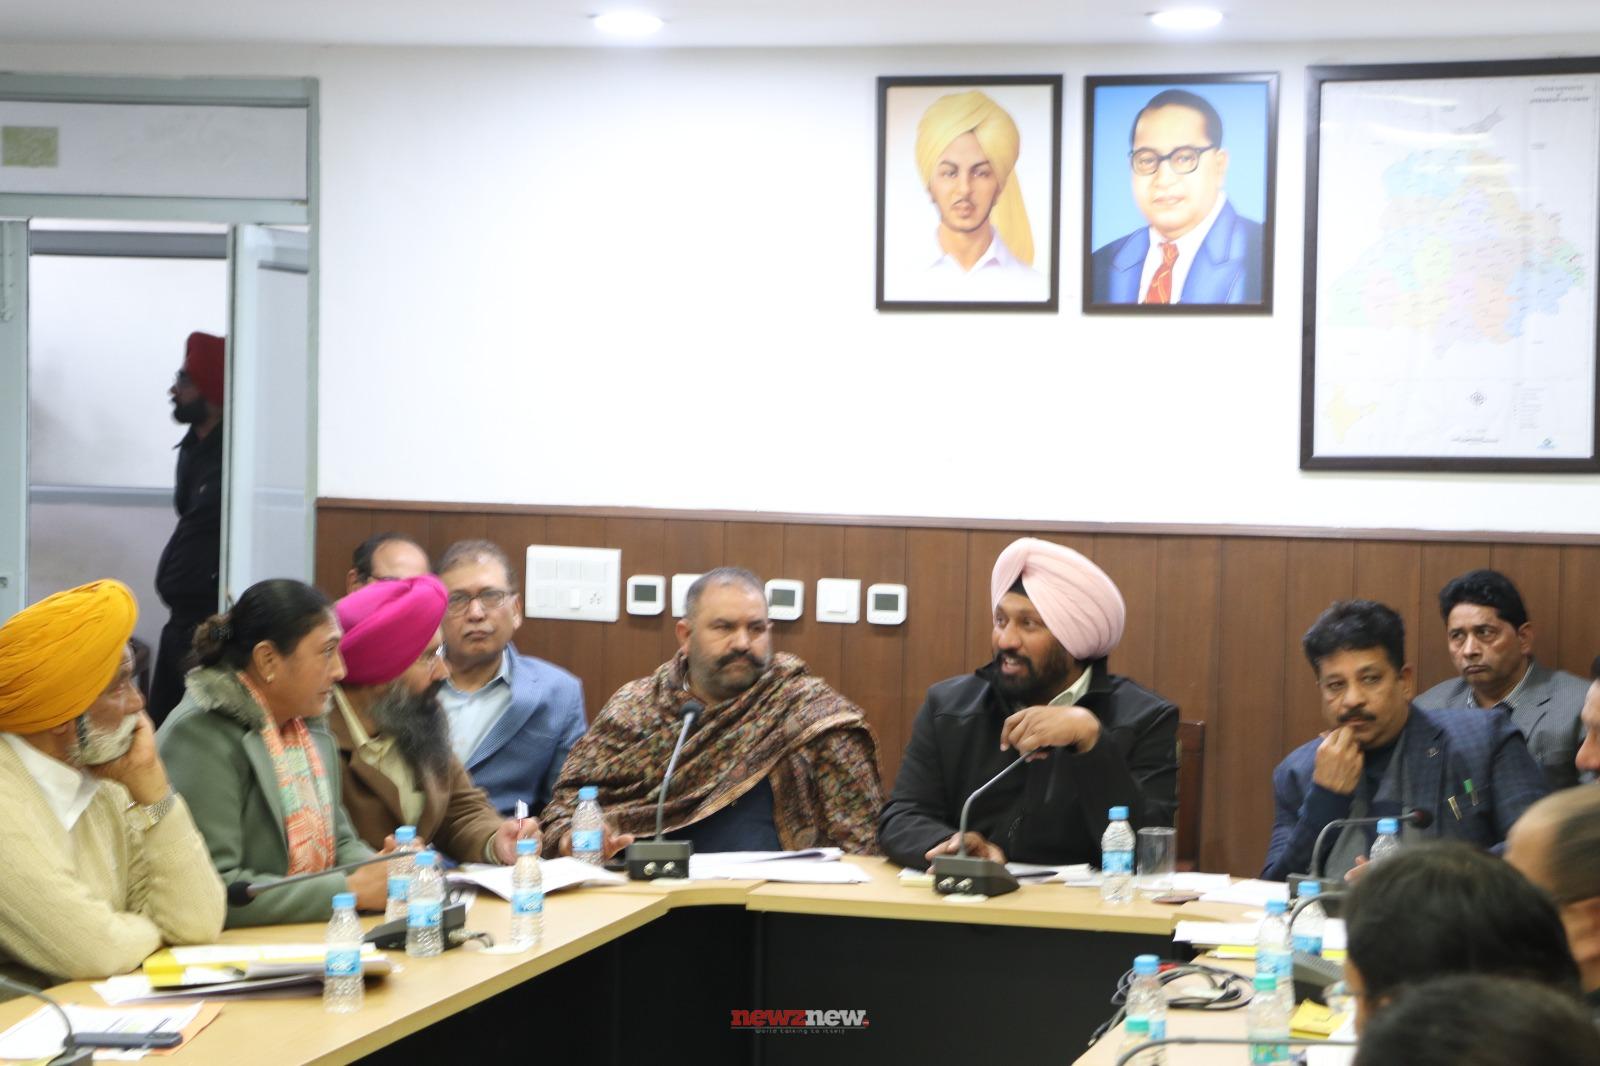 Punjab government, led by Chief Minister Bhagwant Singh Maan, is committed to providing basic facilities, a clean environment, and people-friendly services: Balkar Singh